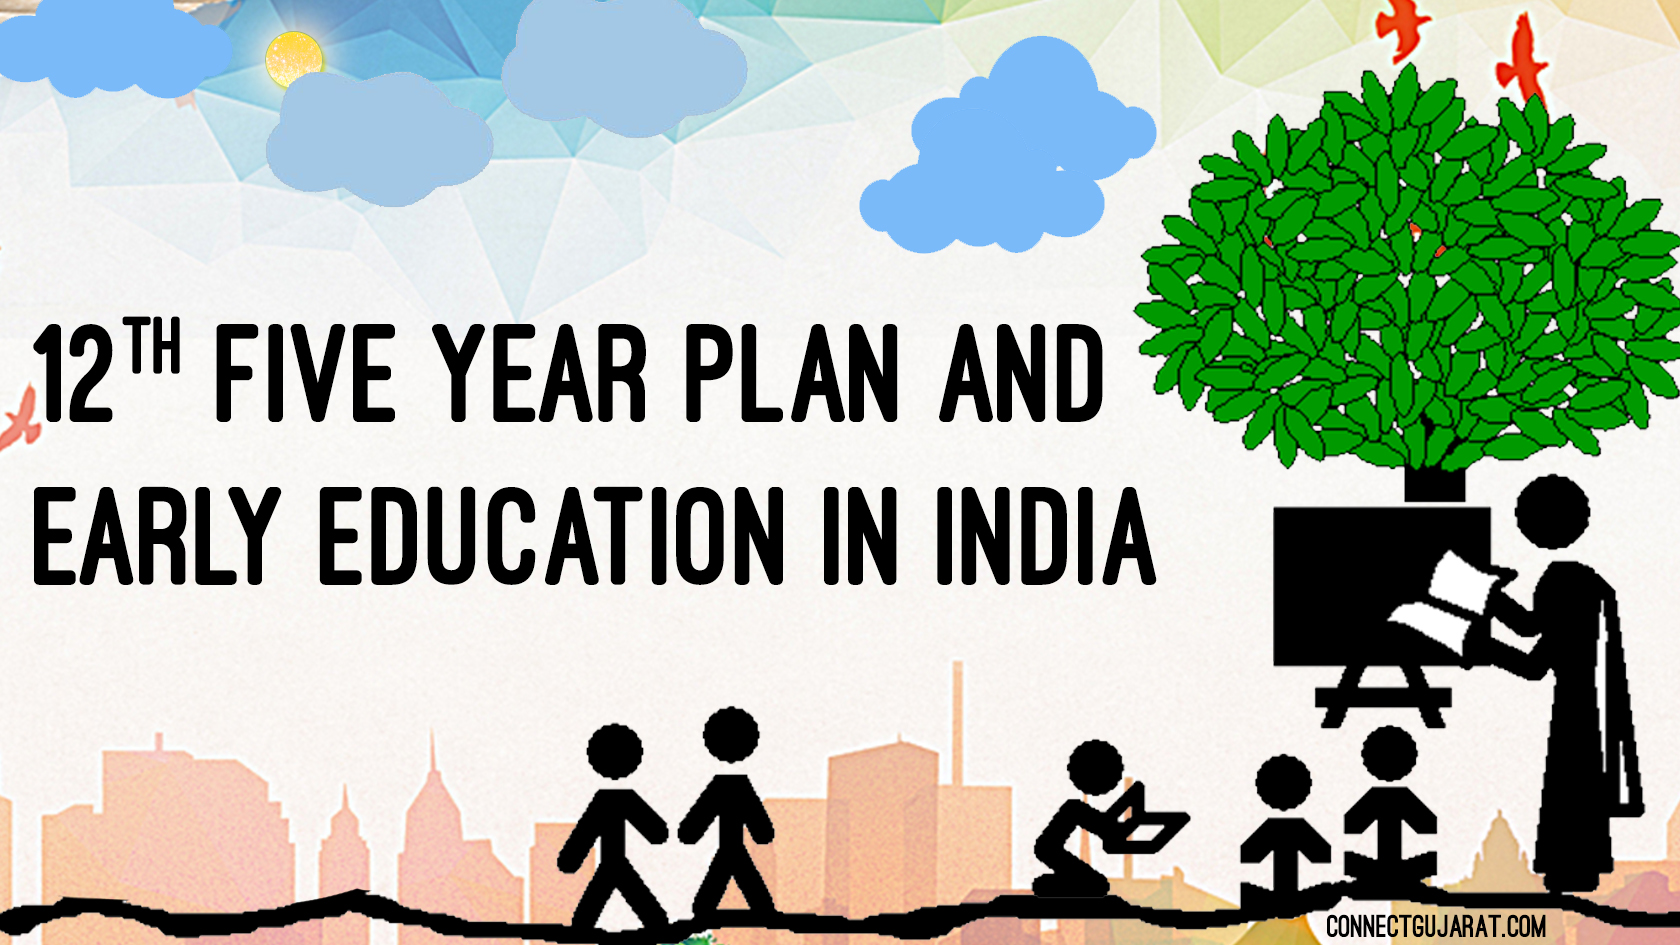 12th Five Year Plan and Early Education in India